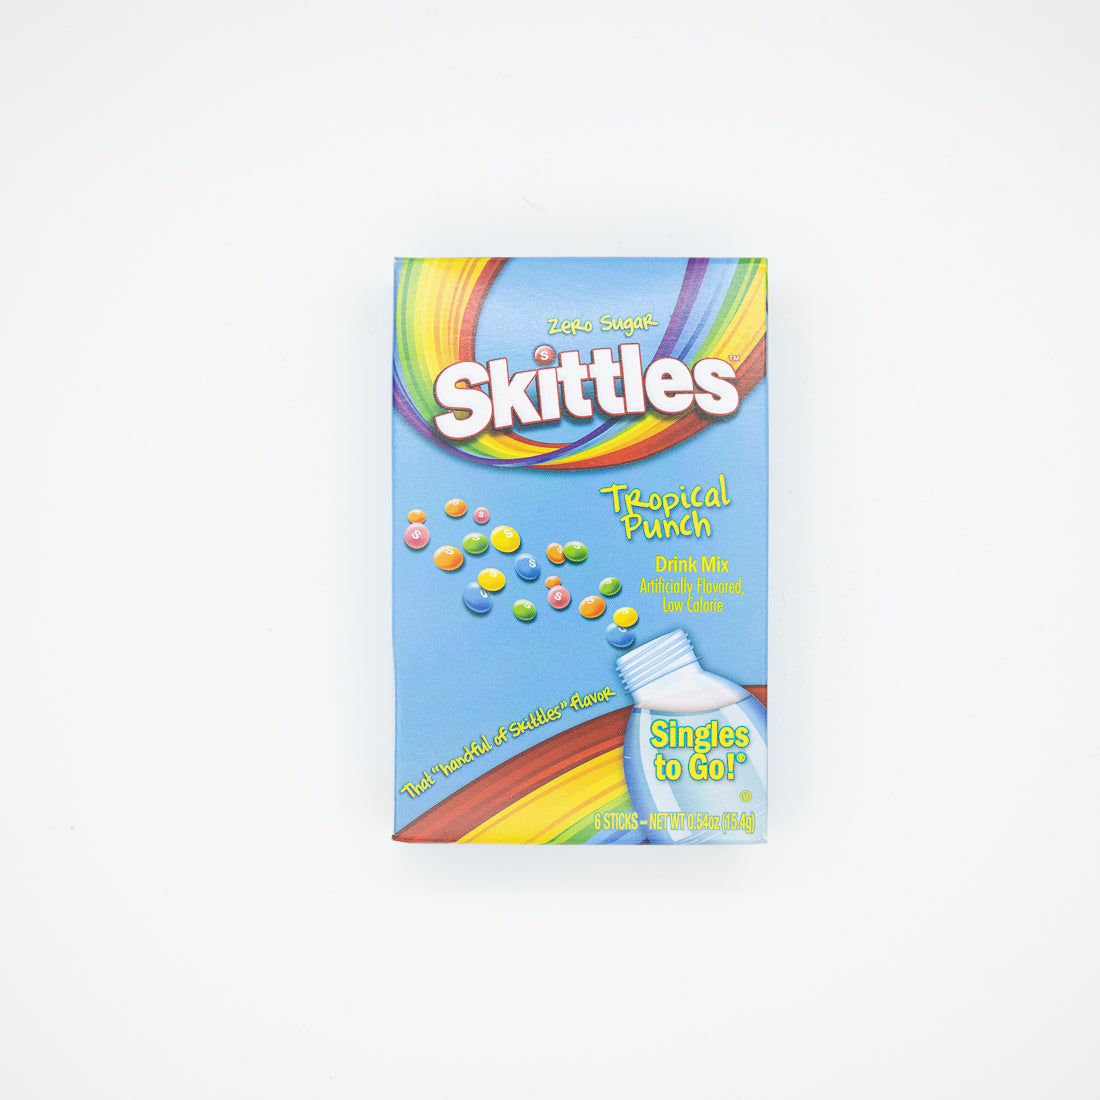 Skittles Tropical Punch Drink Mix